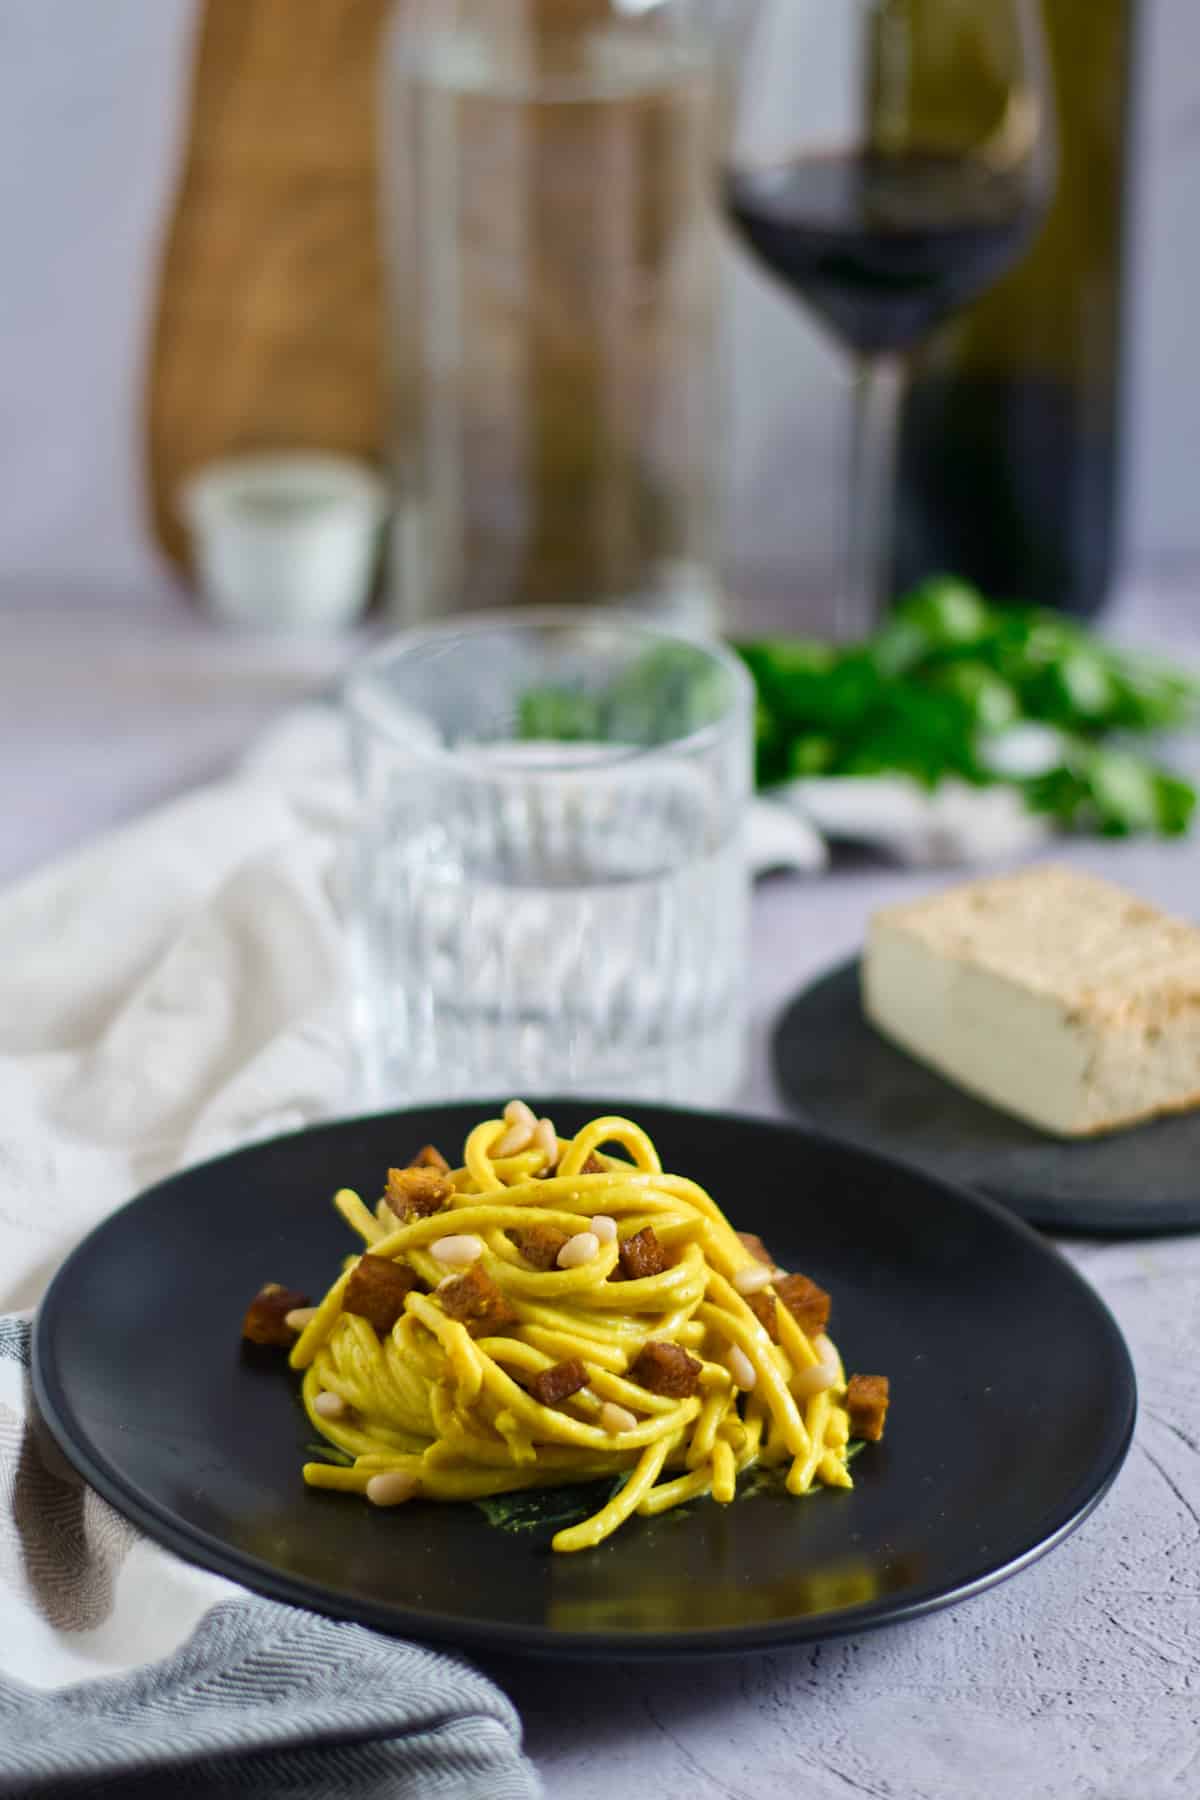 Pasta with tofu and pine nuts on a black plate with glass of water in background.